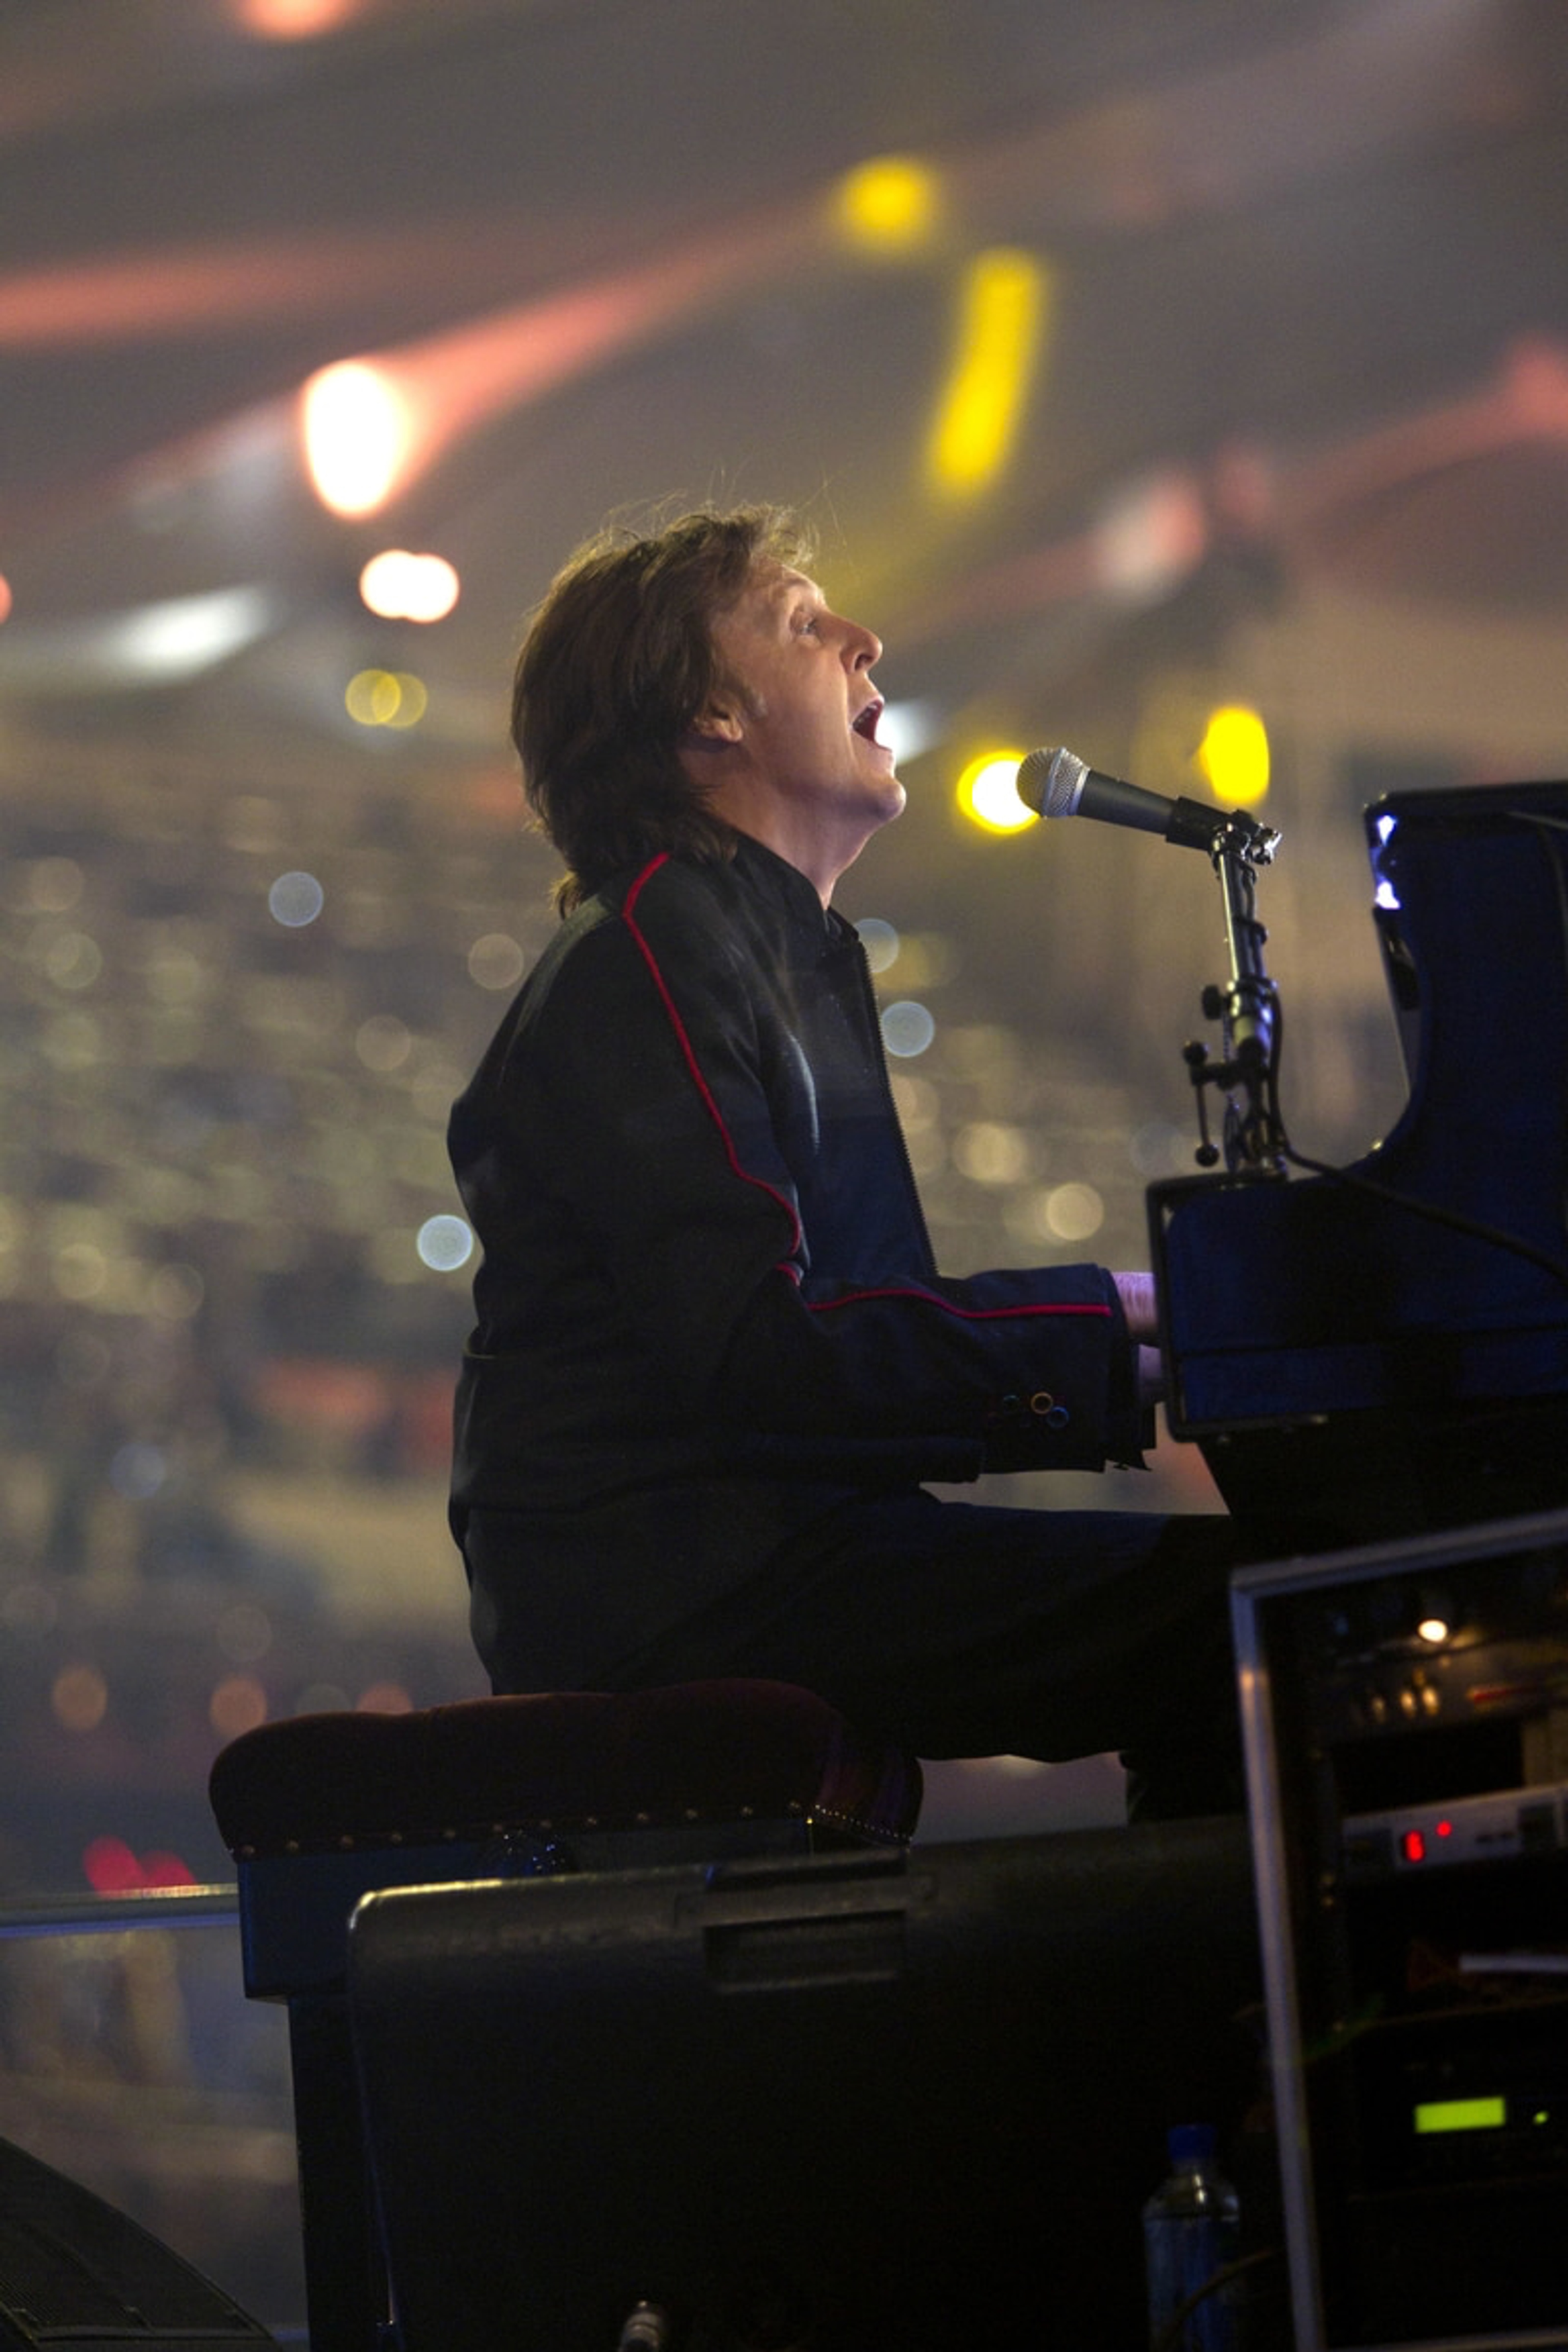 Paul performing at the Olympics Opening Ceremony, London, 27-Jul-12